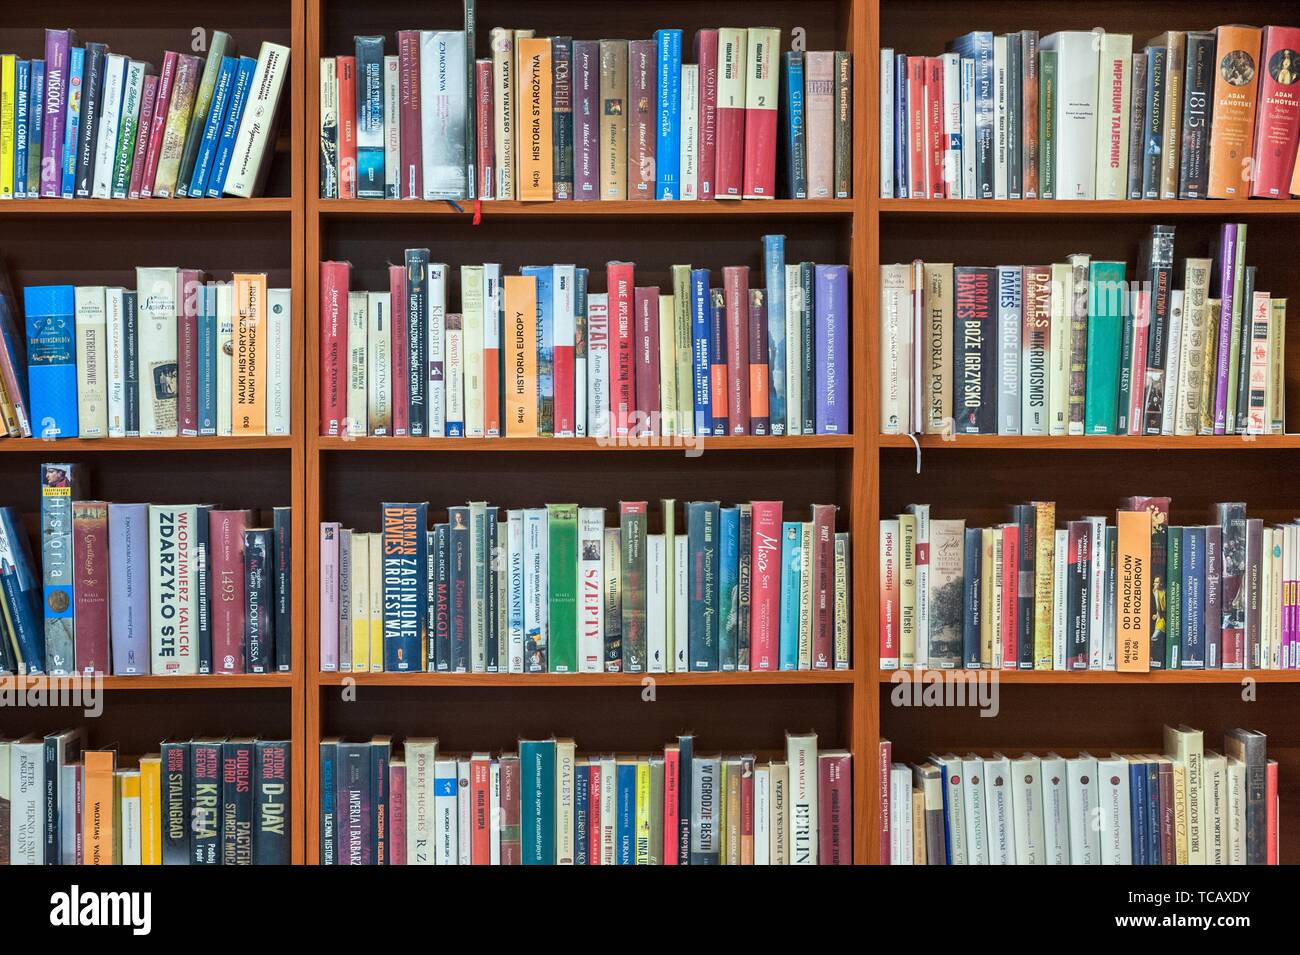 Bookshelf in public library, front view, horizontal. Stock Photo